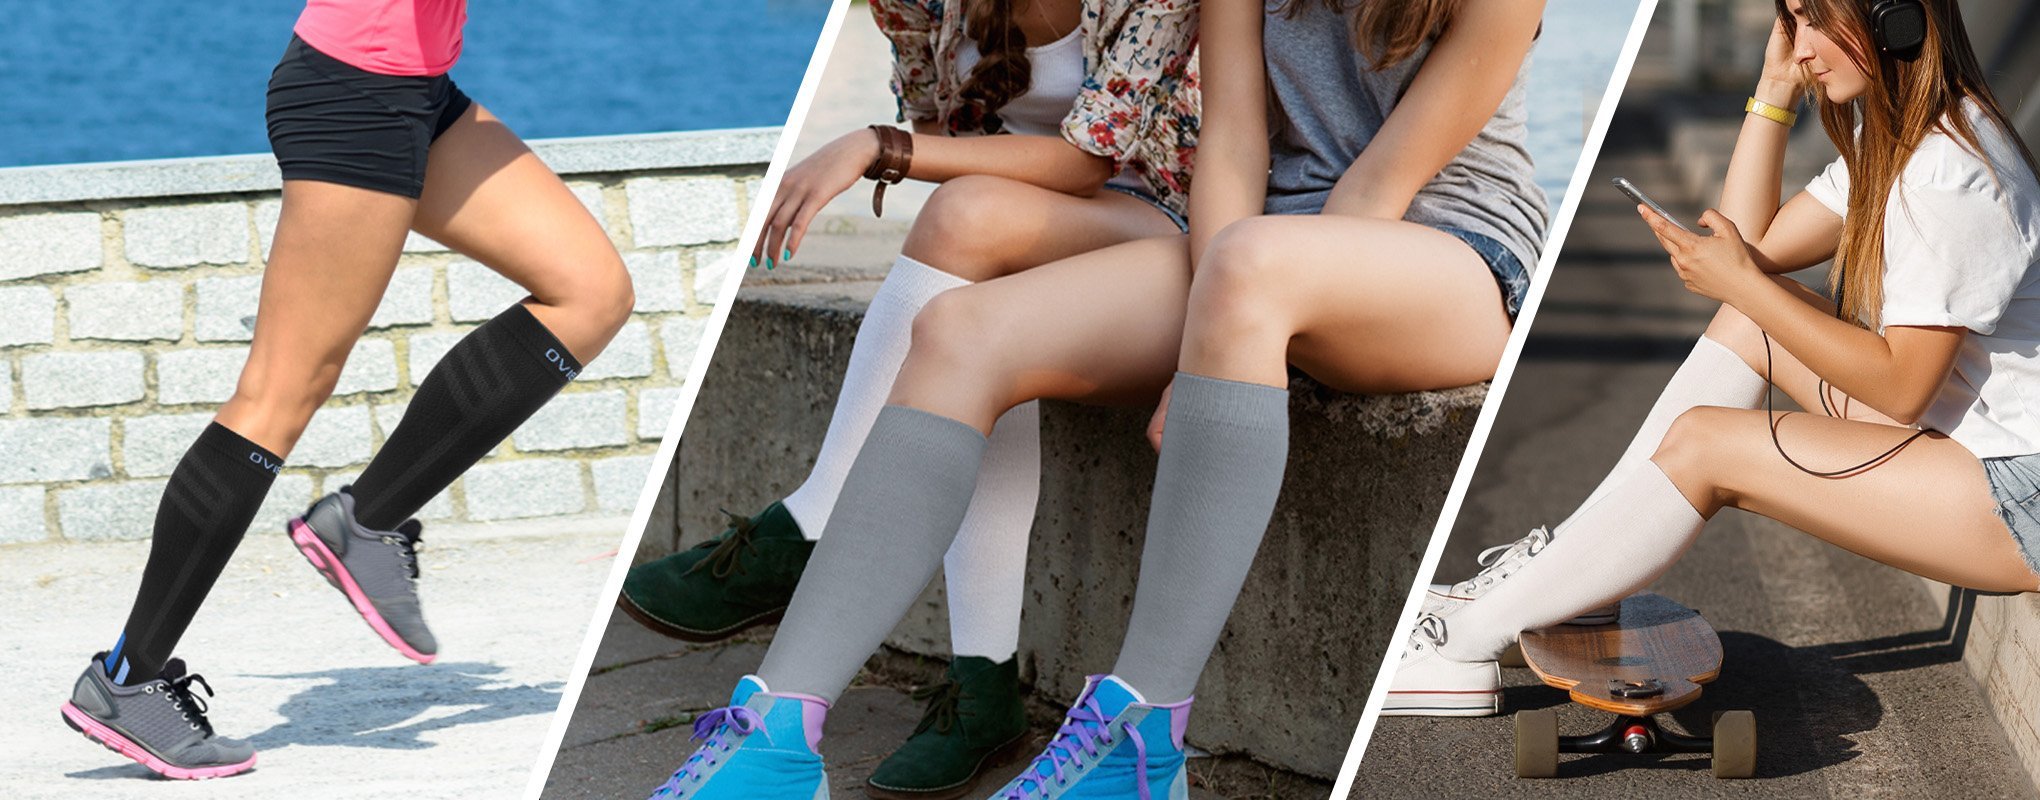 Compression Socks - Comfort and Support - Cambivo